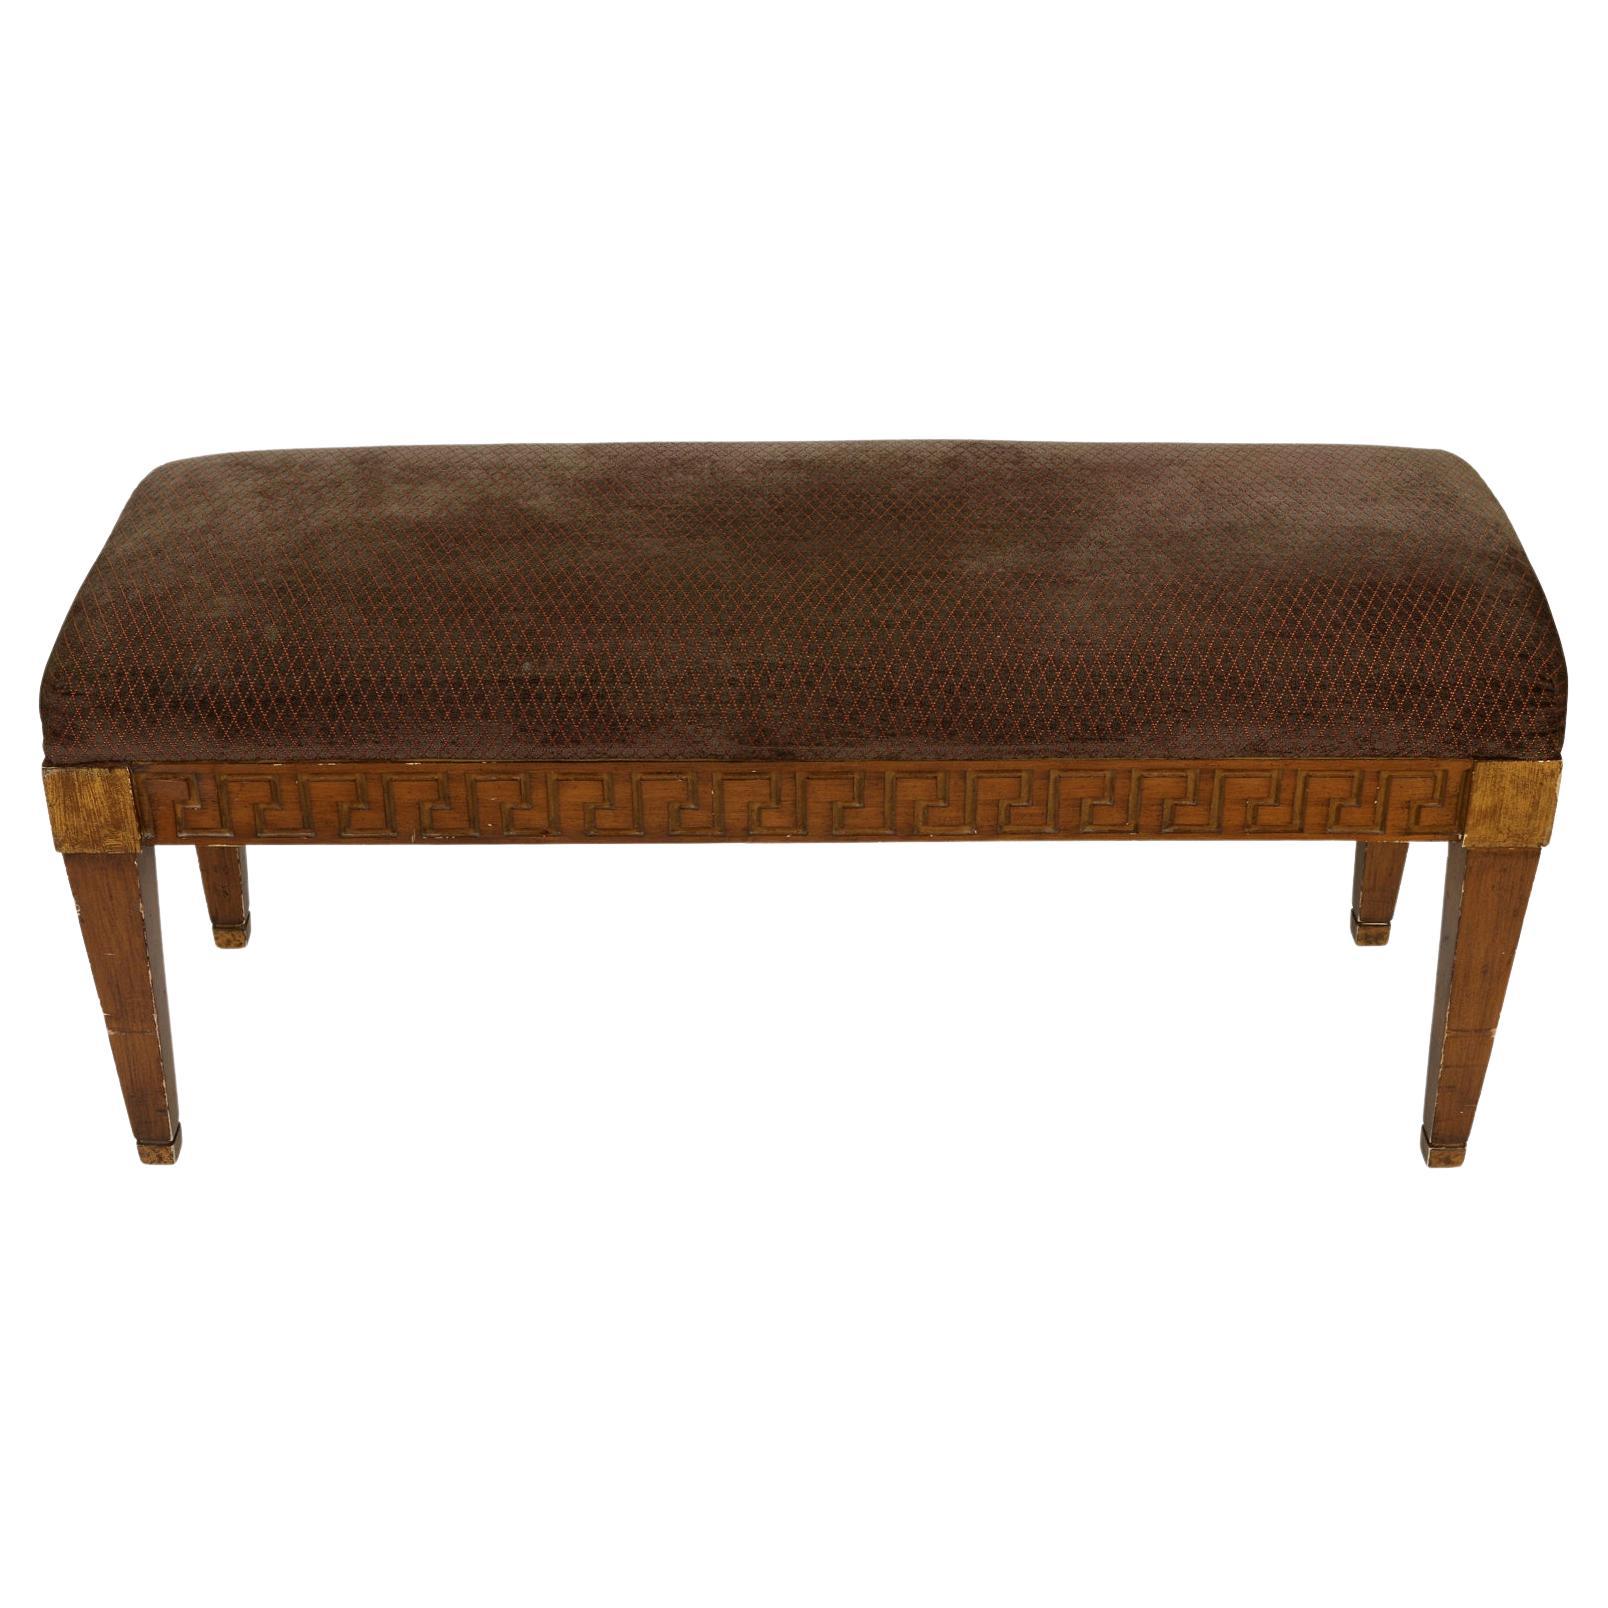 Upholstered Bench with Greek Key Detail